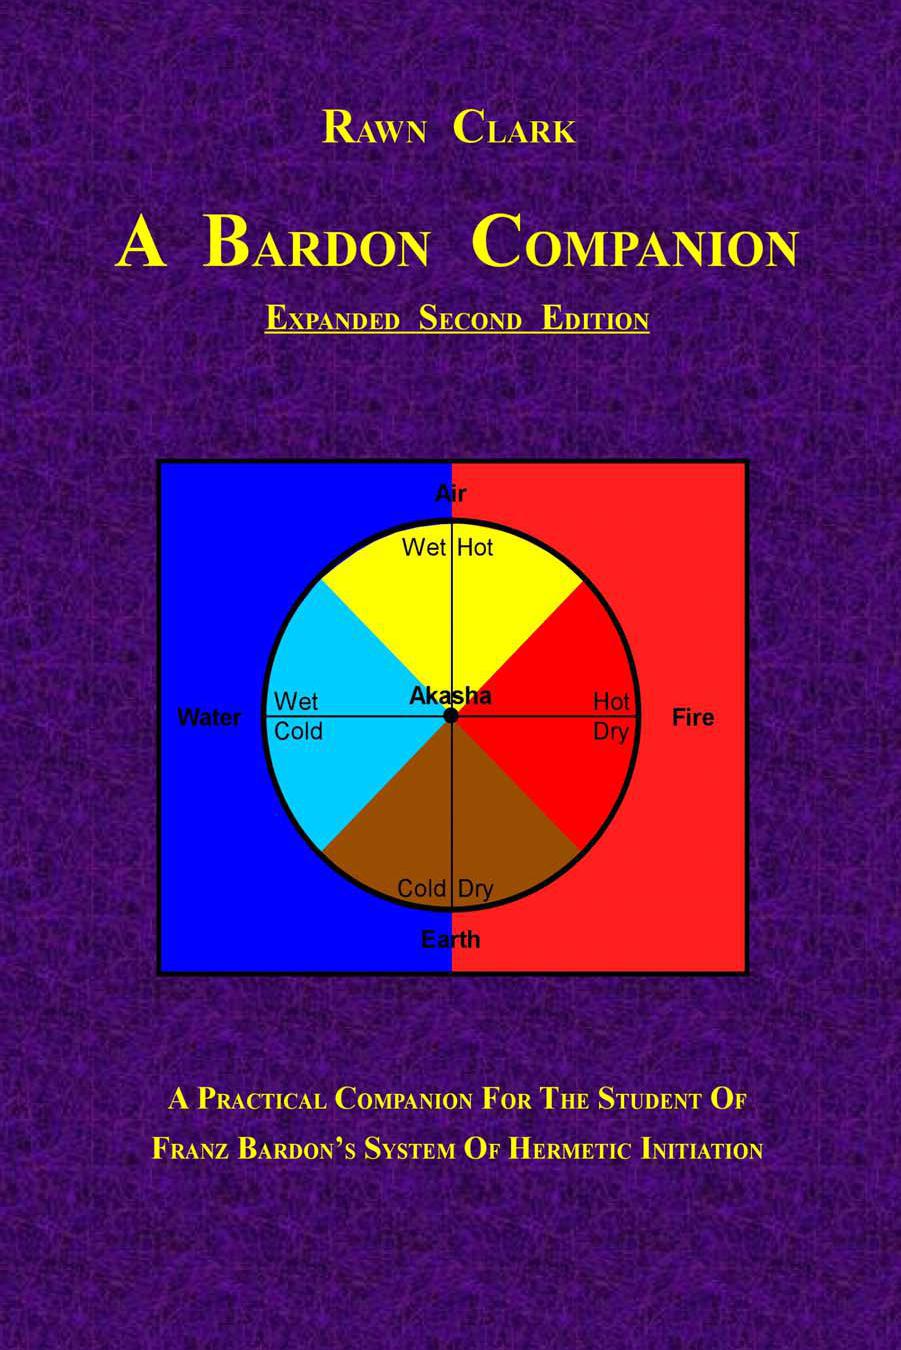 A Bardon Companion: A Practical Companion for the Student of Franz Bardon's System of Hermetic Initiation